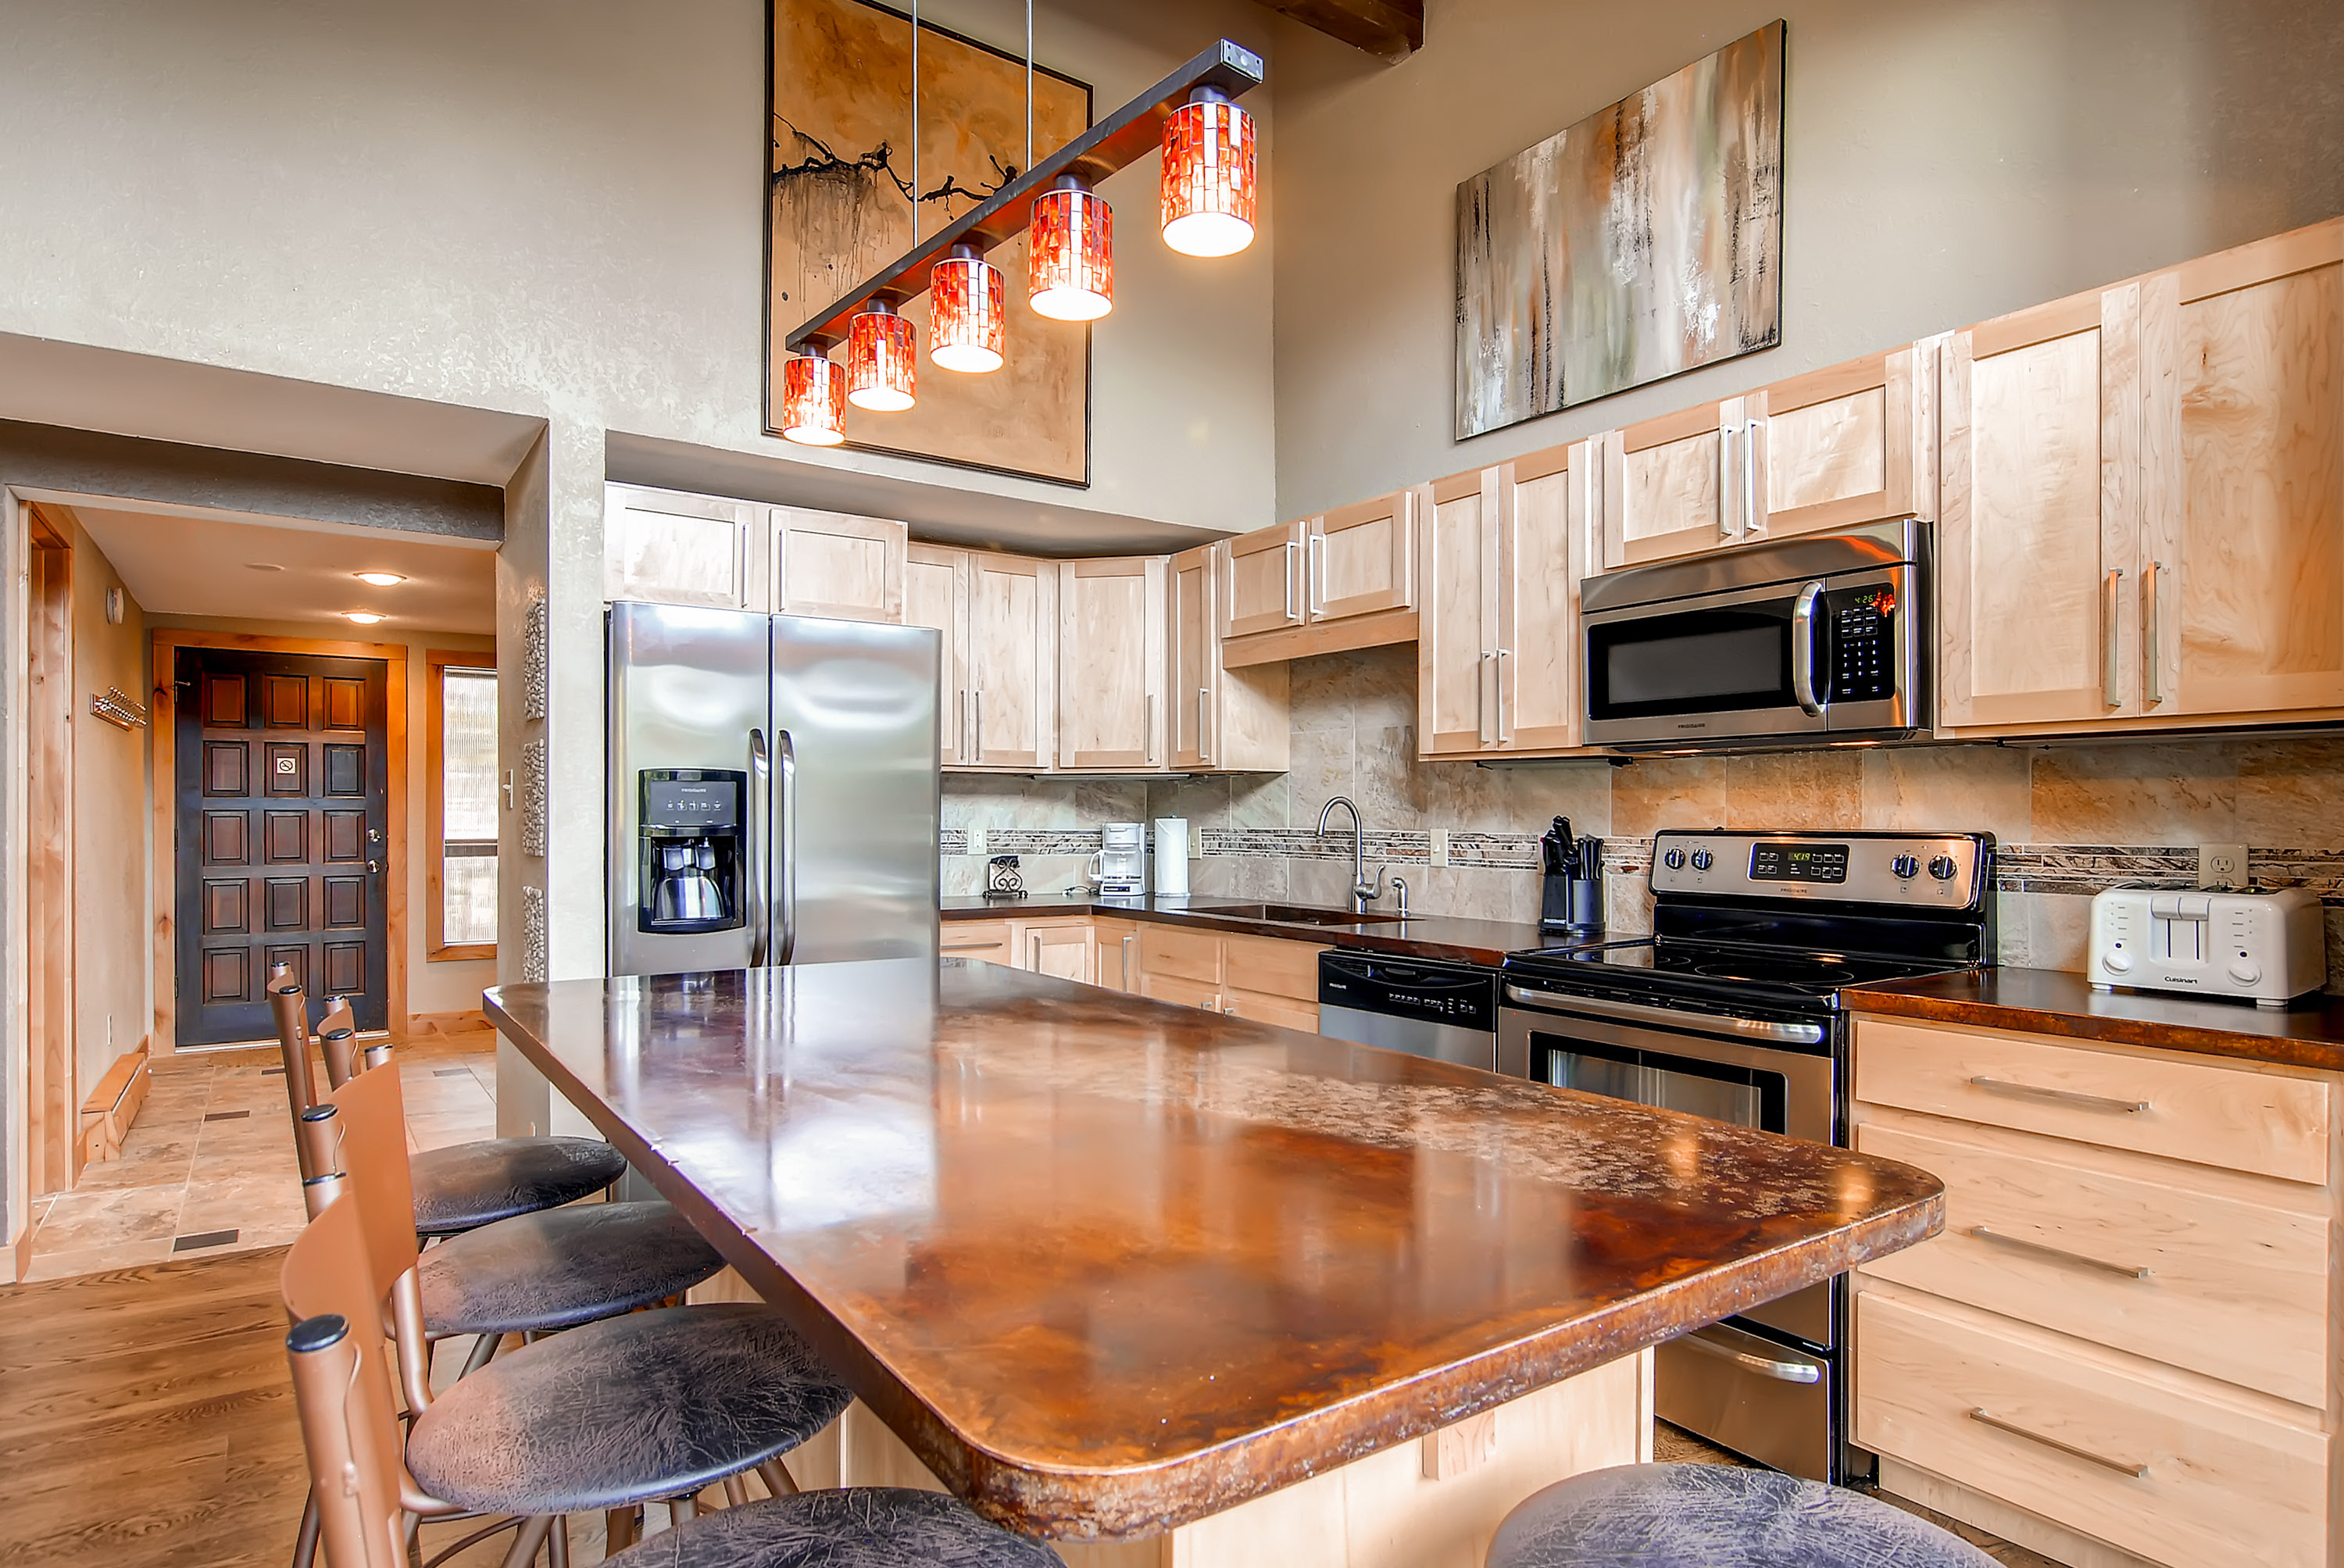 Prepare great meals in this modern kitchen - 4 O’Clock Lodge A16 Breckenridge Vacation Rental